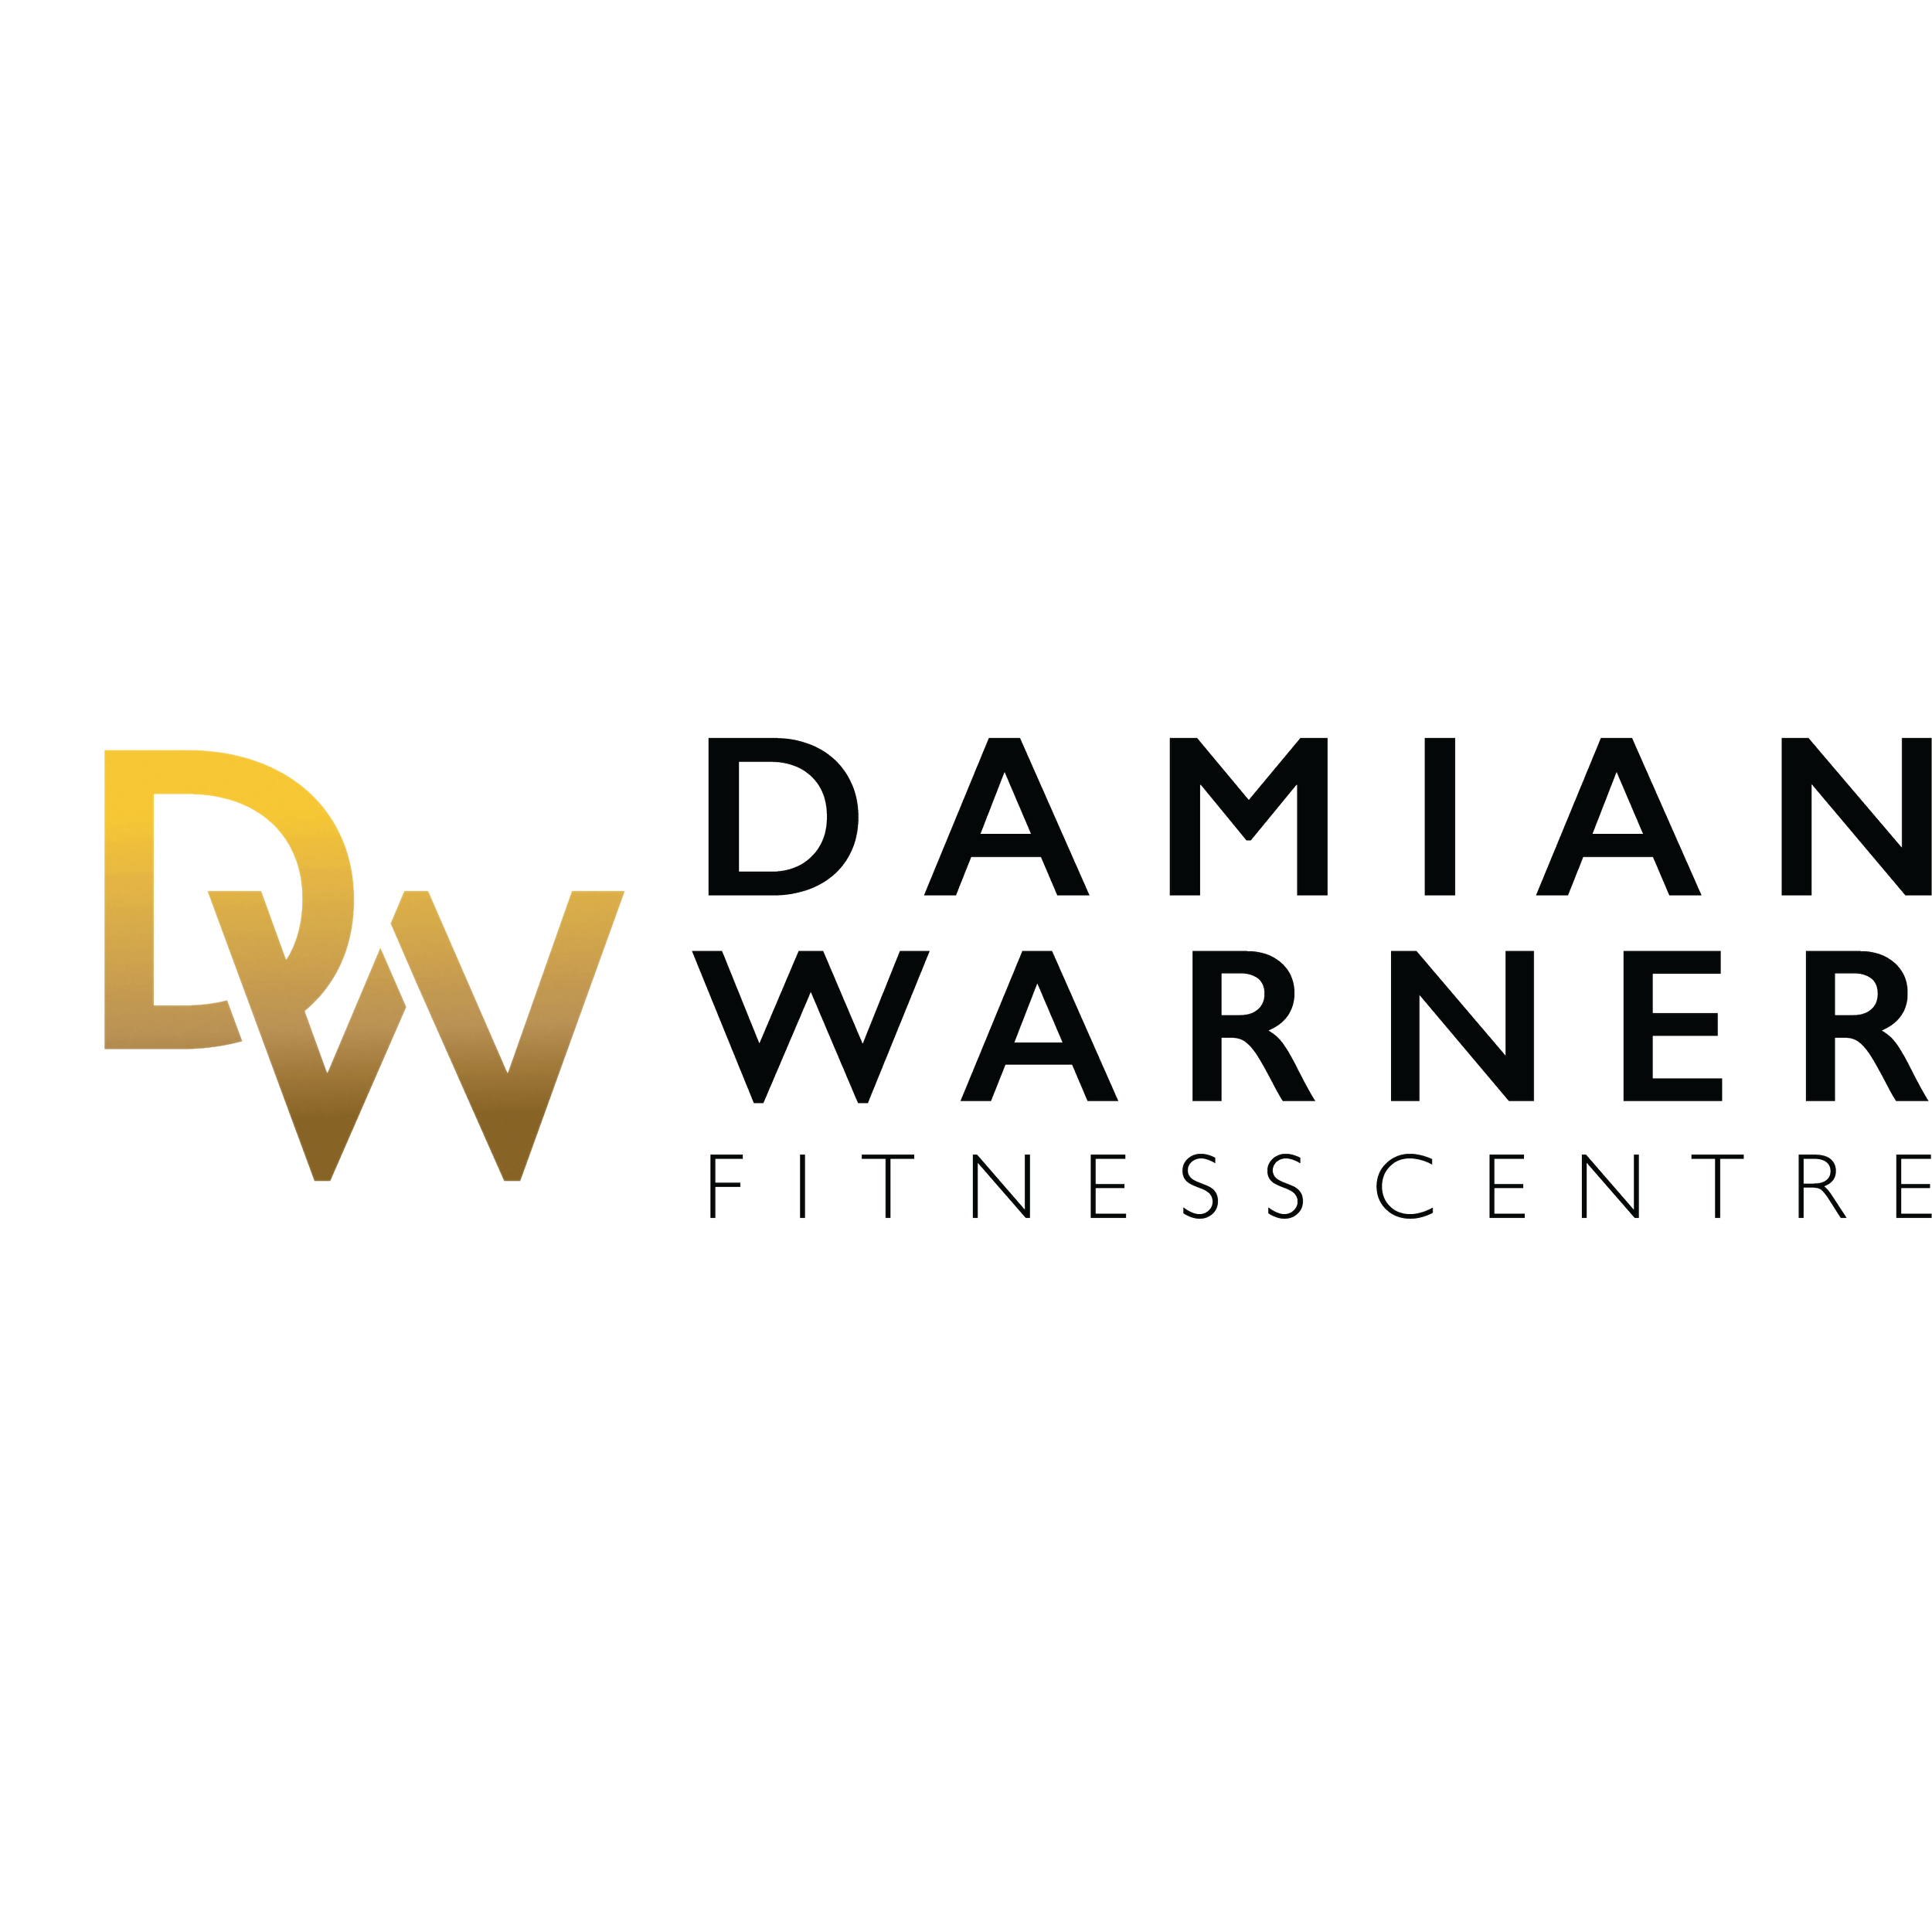 Damian Warner Fitness Centre.png